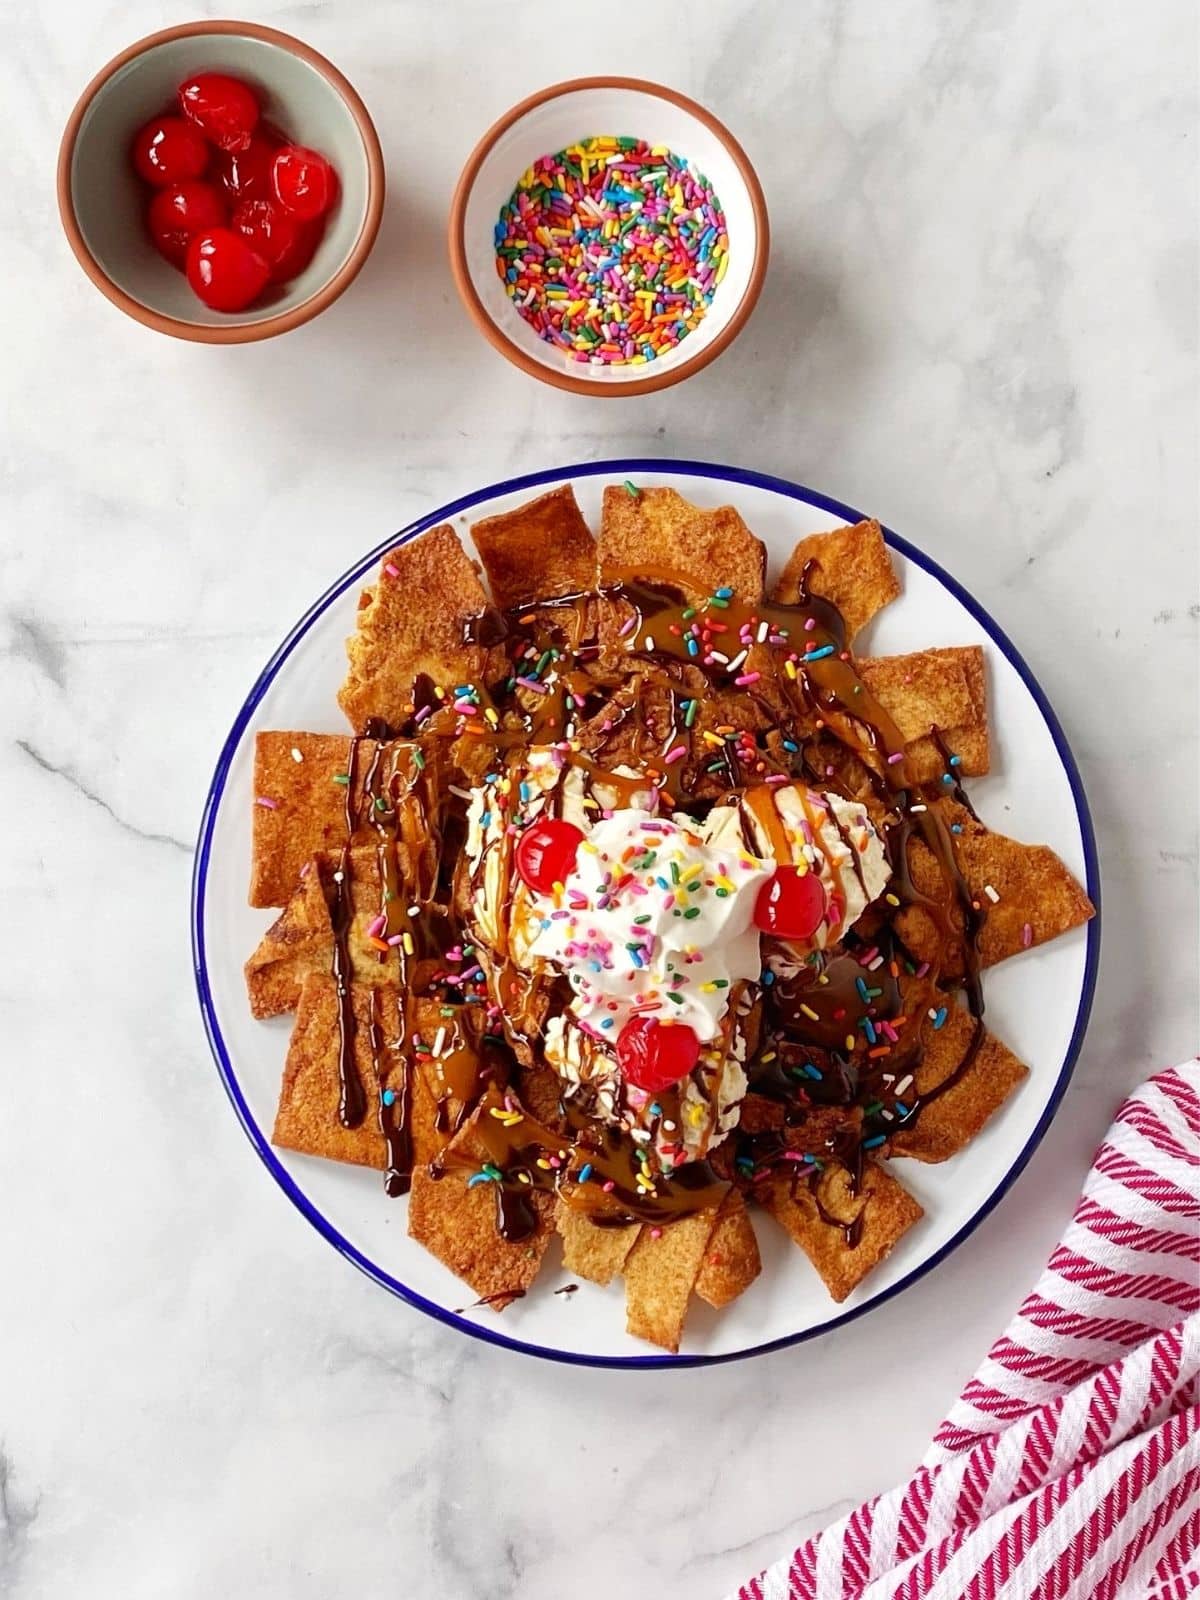 dessert nachos topped with cherries and sprinkles.